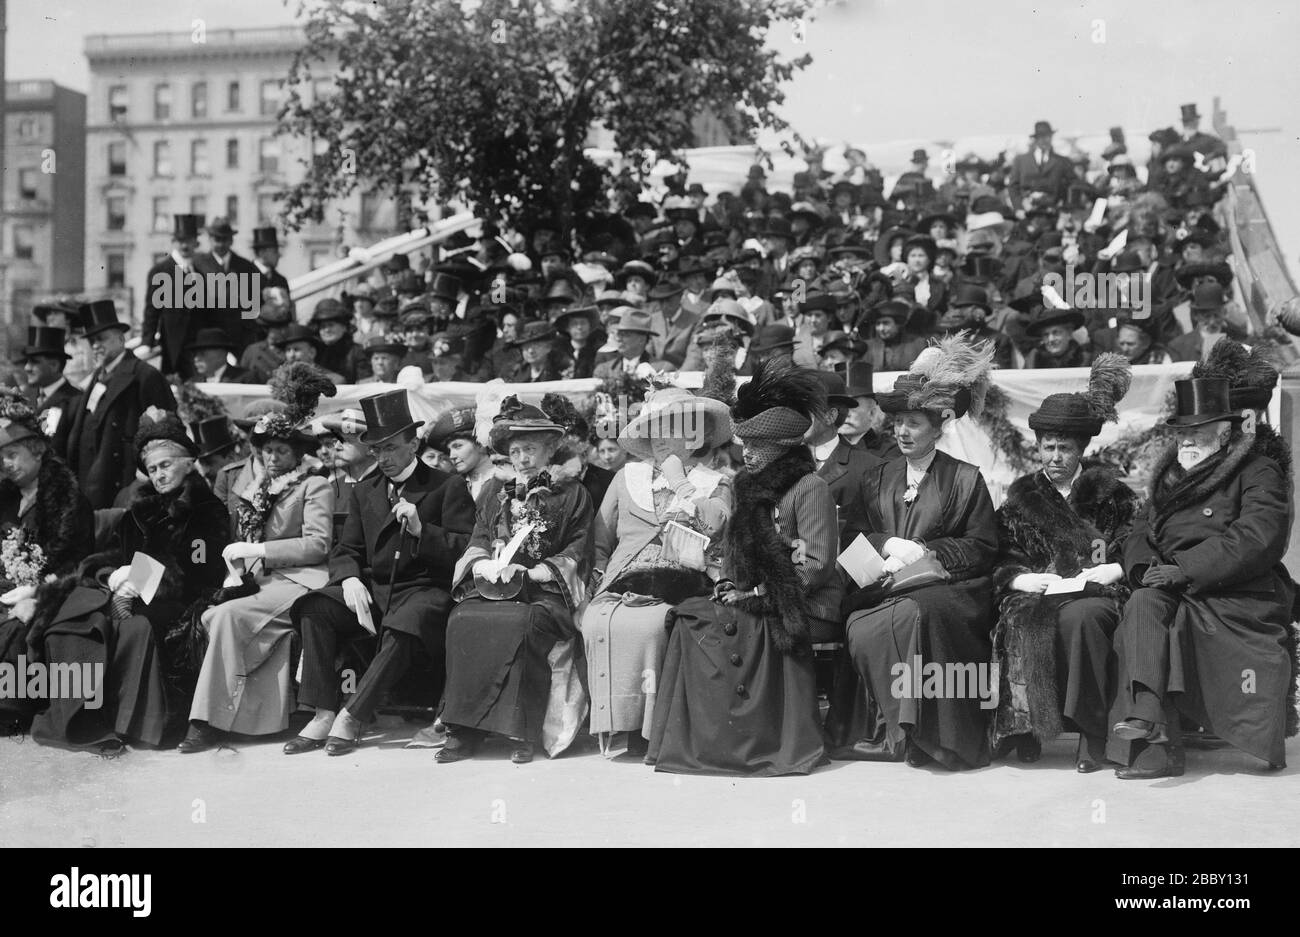 Unveiling of Karl Bitter's 1913 statue of Carl Schurz at Morningside Drive and 116th Street in New York City. People identified in the front row (named at the bottom of the negative) are: Miss Schurz, Mrs. Juessen (sister), Miss Juessen (niece), Carl L. Schurz, Miss Agathe Schurz, Mrs. Carl L. Schurz, Mrs. Jos. & Miss Choate, Andrew Carnegie & wife Stock Photo